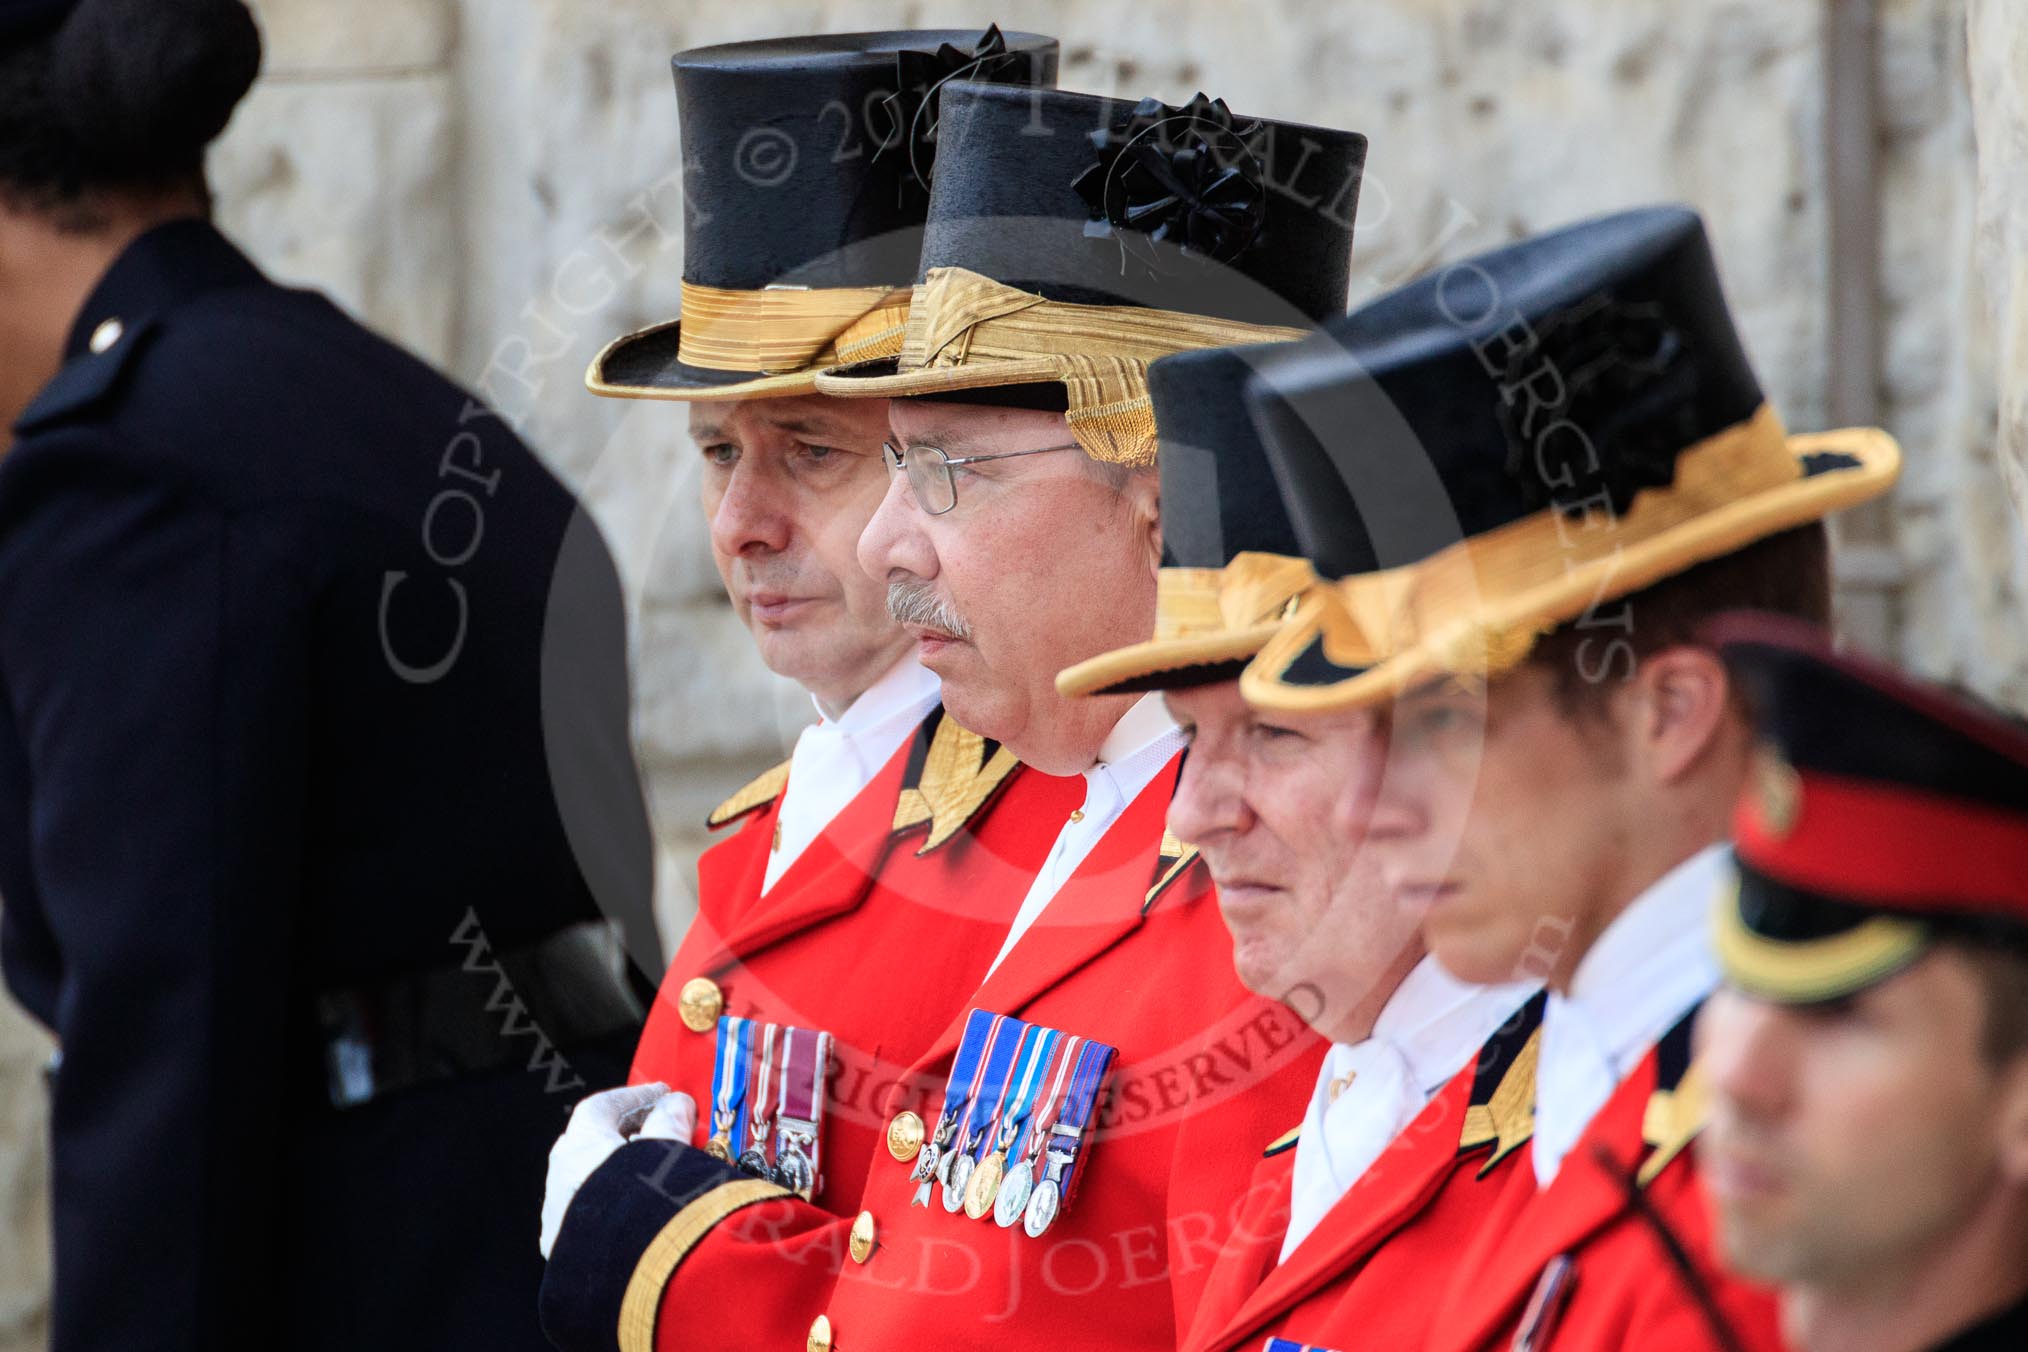 during The Colonel's Review {iptcyear4} (final rehearsal for Trooping the Colour, The Queen's Birthday Parade)  at Horse Guards Parade, Westminster, London, 2 June 2018, 10:54.